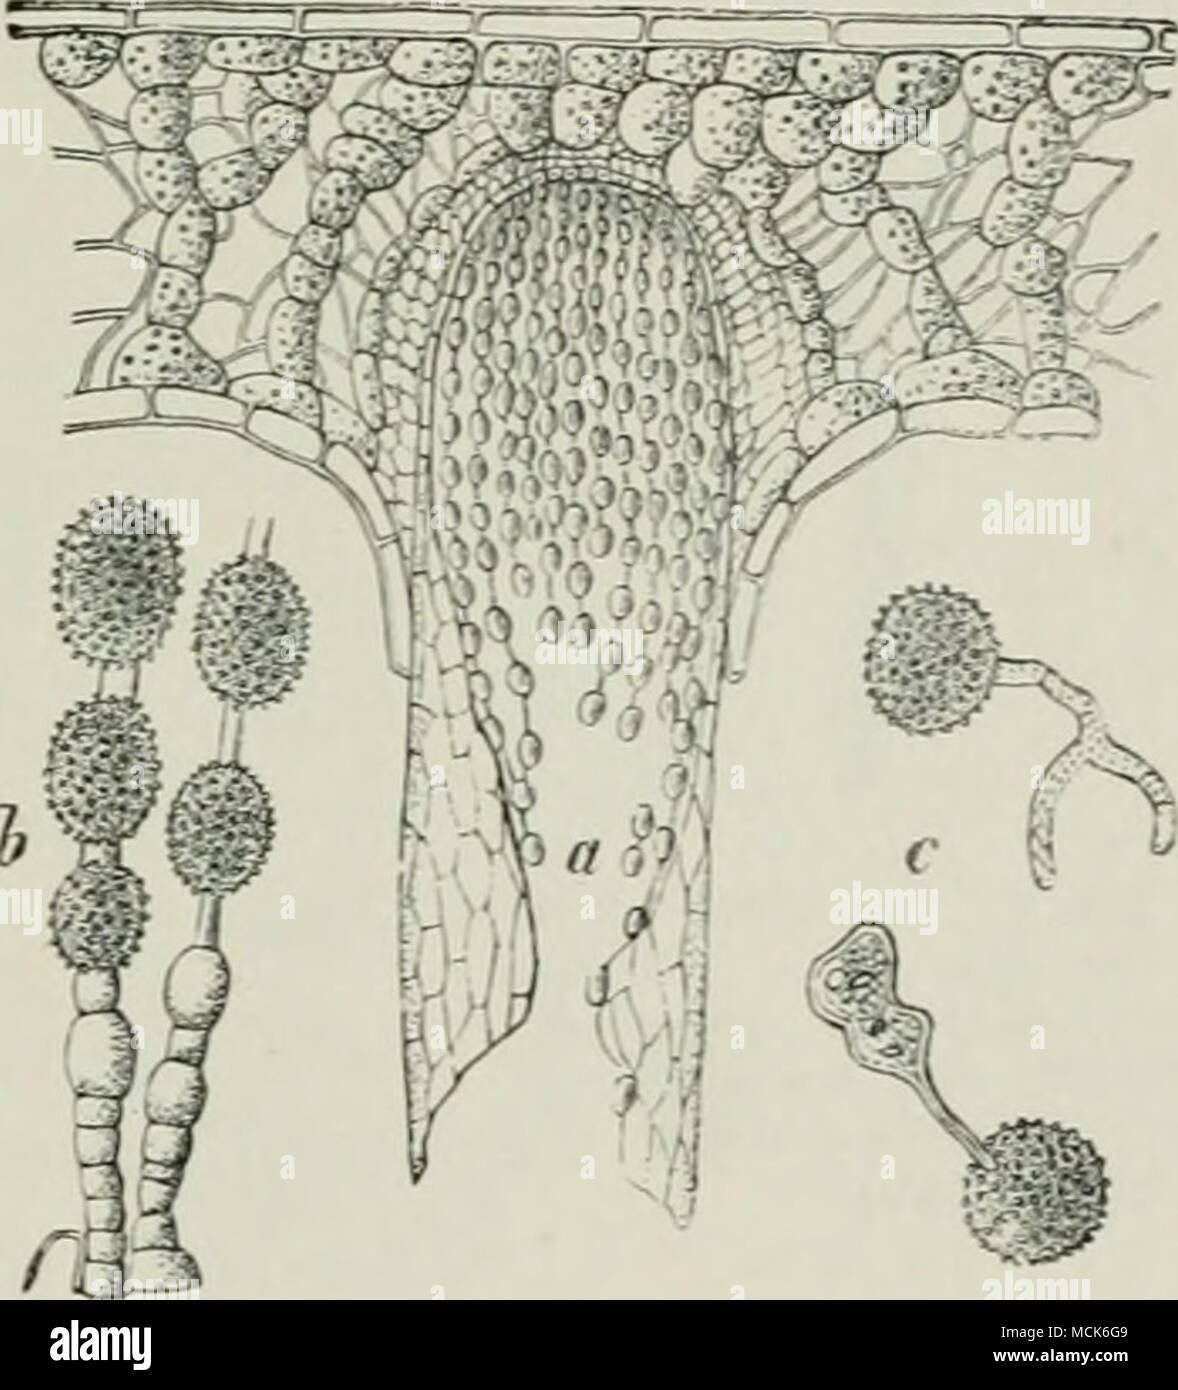 . Fig. 206.—Aecidium in a needle of Silver Fir (much enlarged), b, Series of aecidiospores and intermediate cells. '•, Germinating aecidiospores. (After R. Hartig.) This aecidium is also fouud on Abies cephalonica in Upper Bavaria. Barclayella deformans Diet.^ This has been found in the Himalaya region on needles and young twigs of Picea Morinda (Smithiana). Teleuto- spore-sori are developed, accompanied by distortion of the host. Aecidia and uredospores are unknown. ^Barclay, &quot;Oil a Uredo of the Himalaya Spritce-Jir.&quot; Hedwigia, 1891. Calcutta, 1886; and Stock Photo